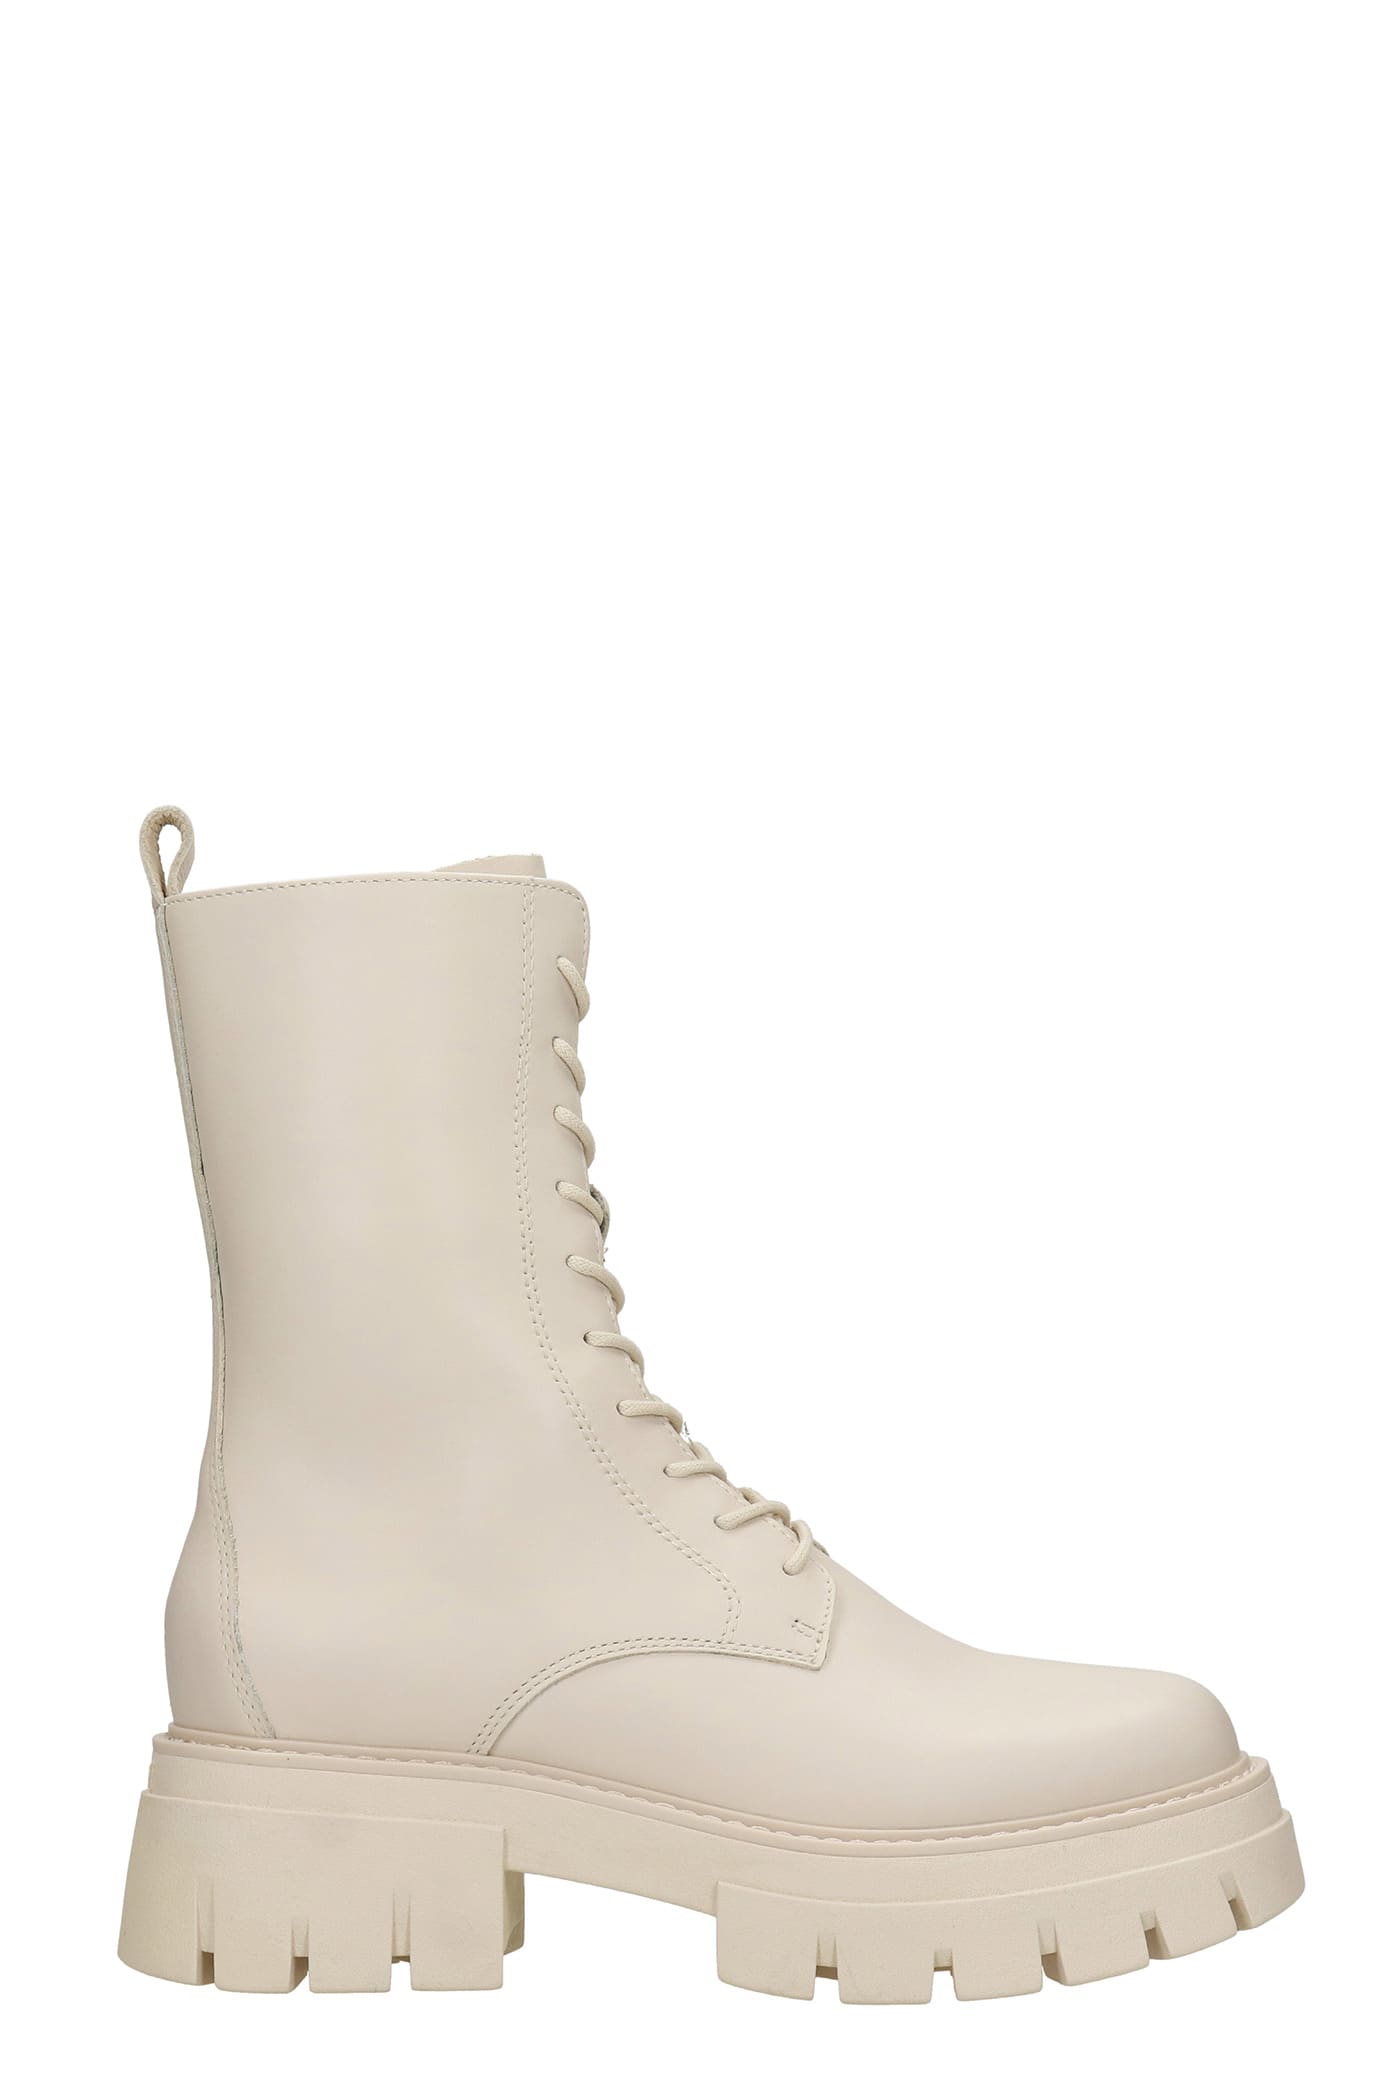 Ash Liam Combat Boots In Beige Leather